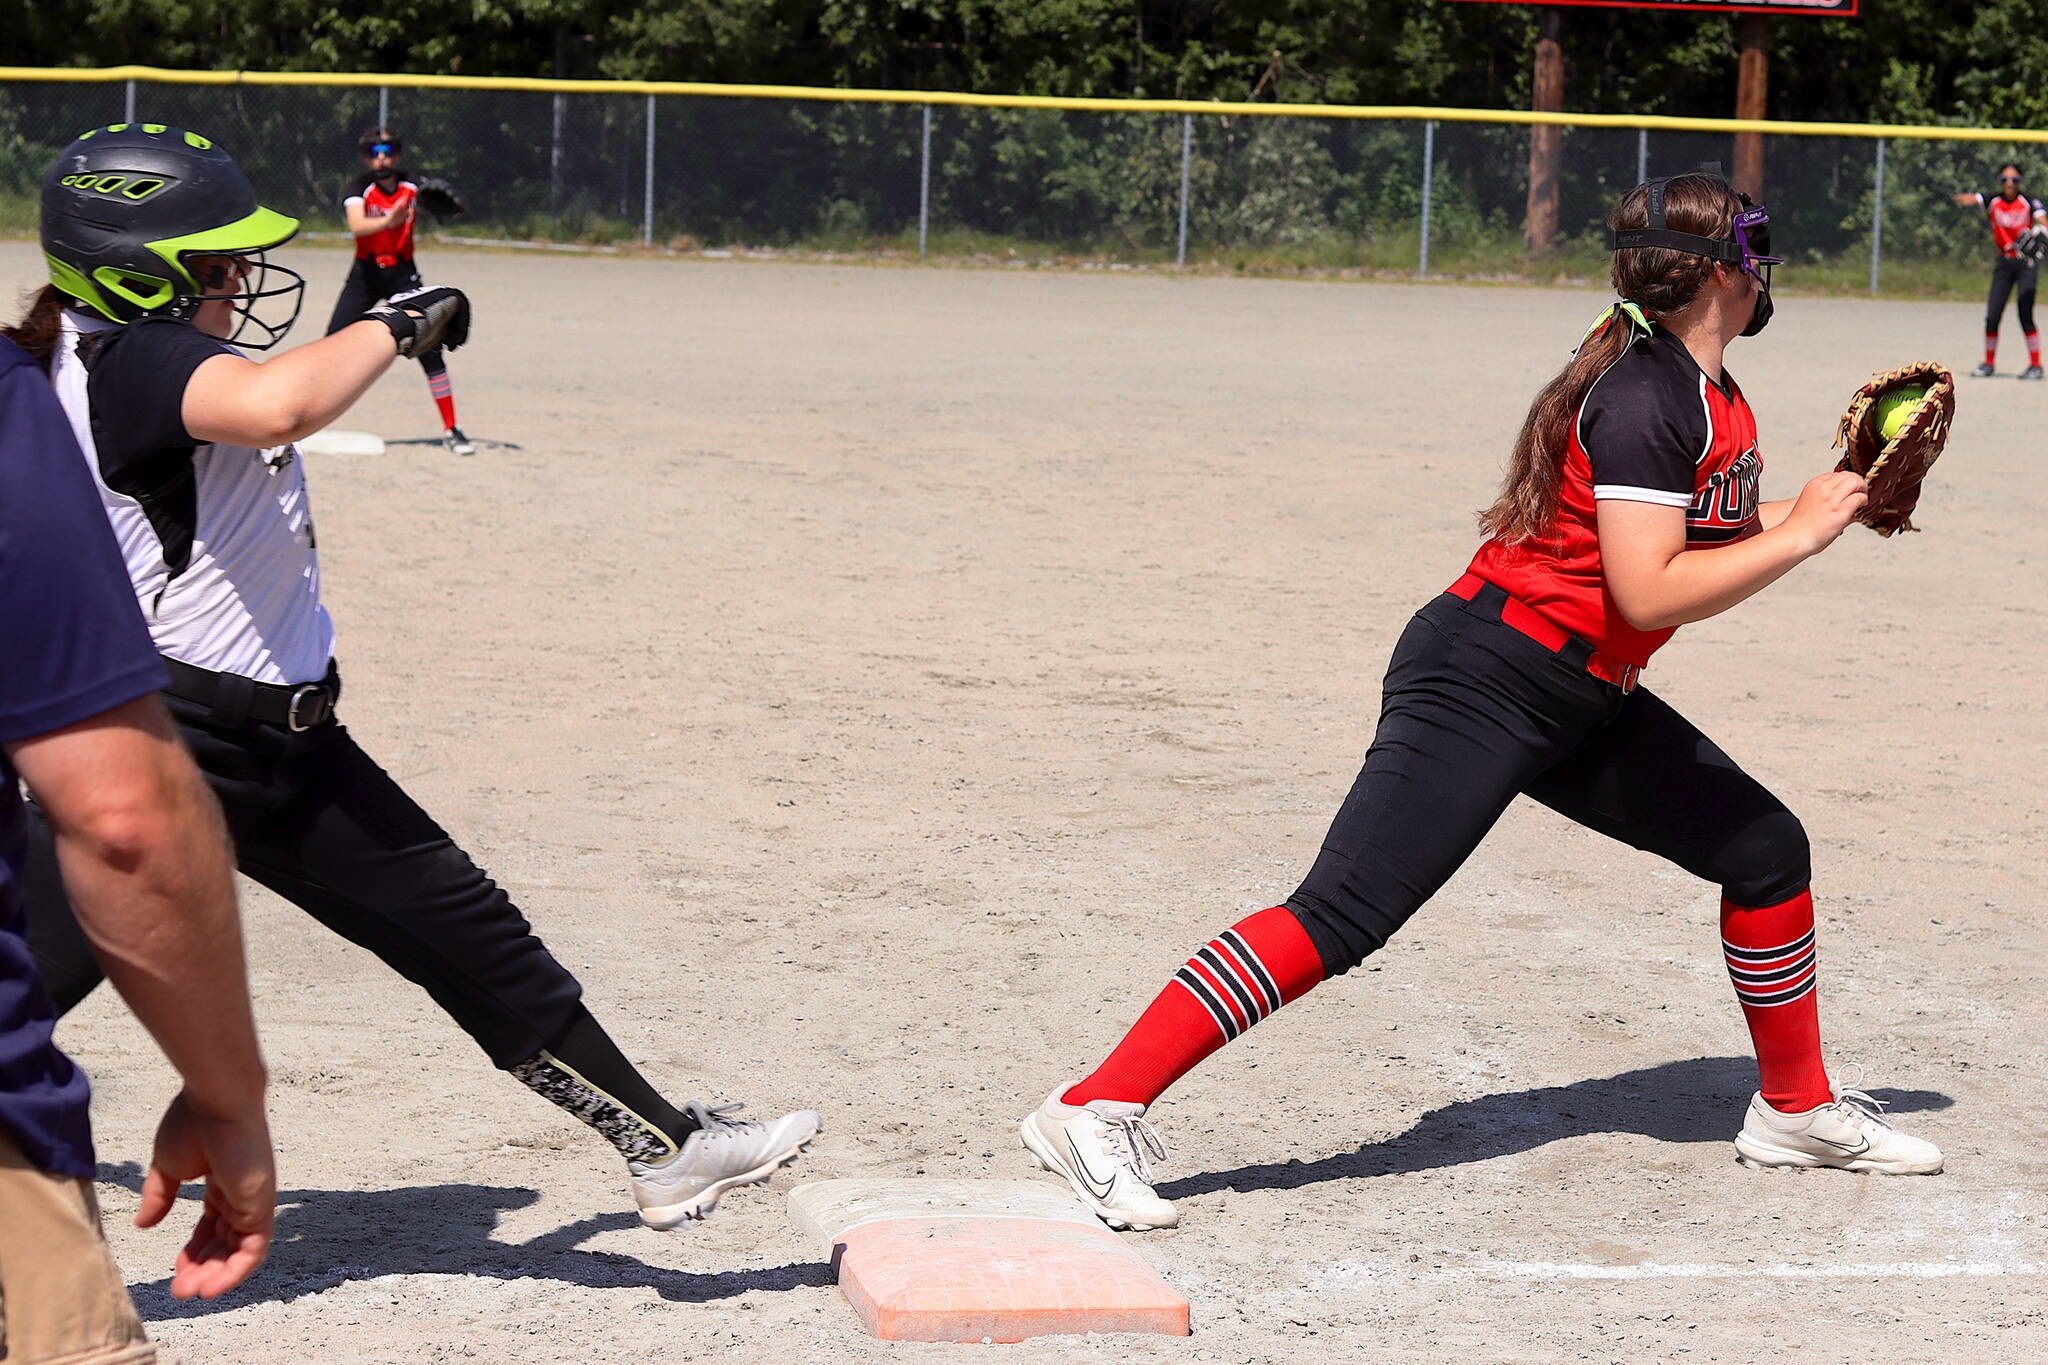 Juneau’s Aurora Lee tags an out at first base to help prevent an attempted comeback by Anchorage’s Abbot-O-Rabbit in the decisive game of the Majors Softball State Tournament on Saturday at Melvin Park. (Mark Sabbatini / Juneau Empire)